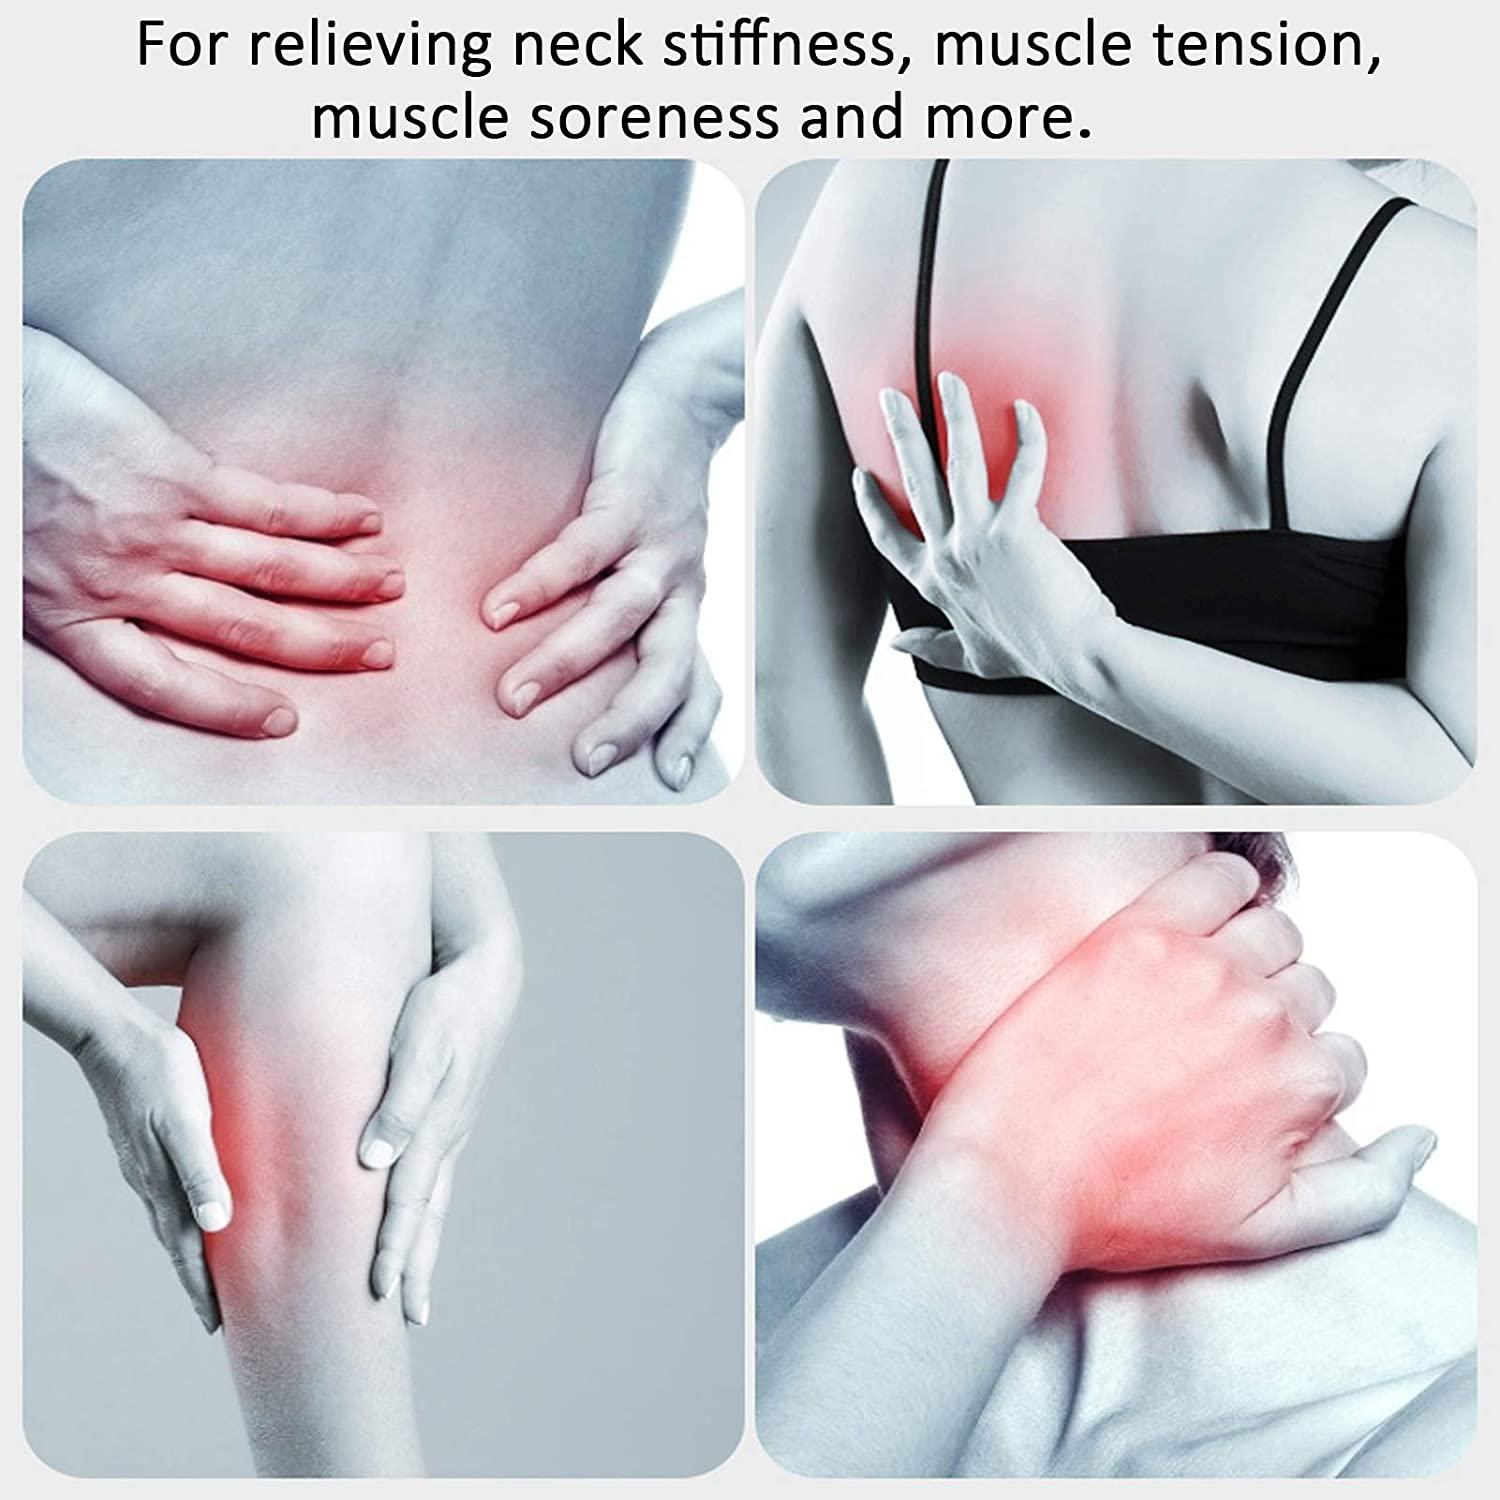 How to Use Reflexology to Relieve Shoulder Pain and Tension